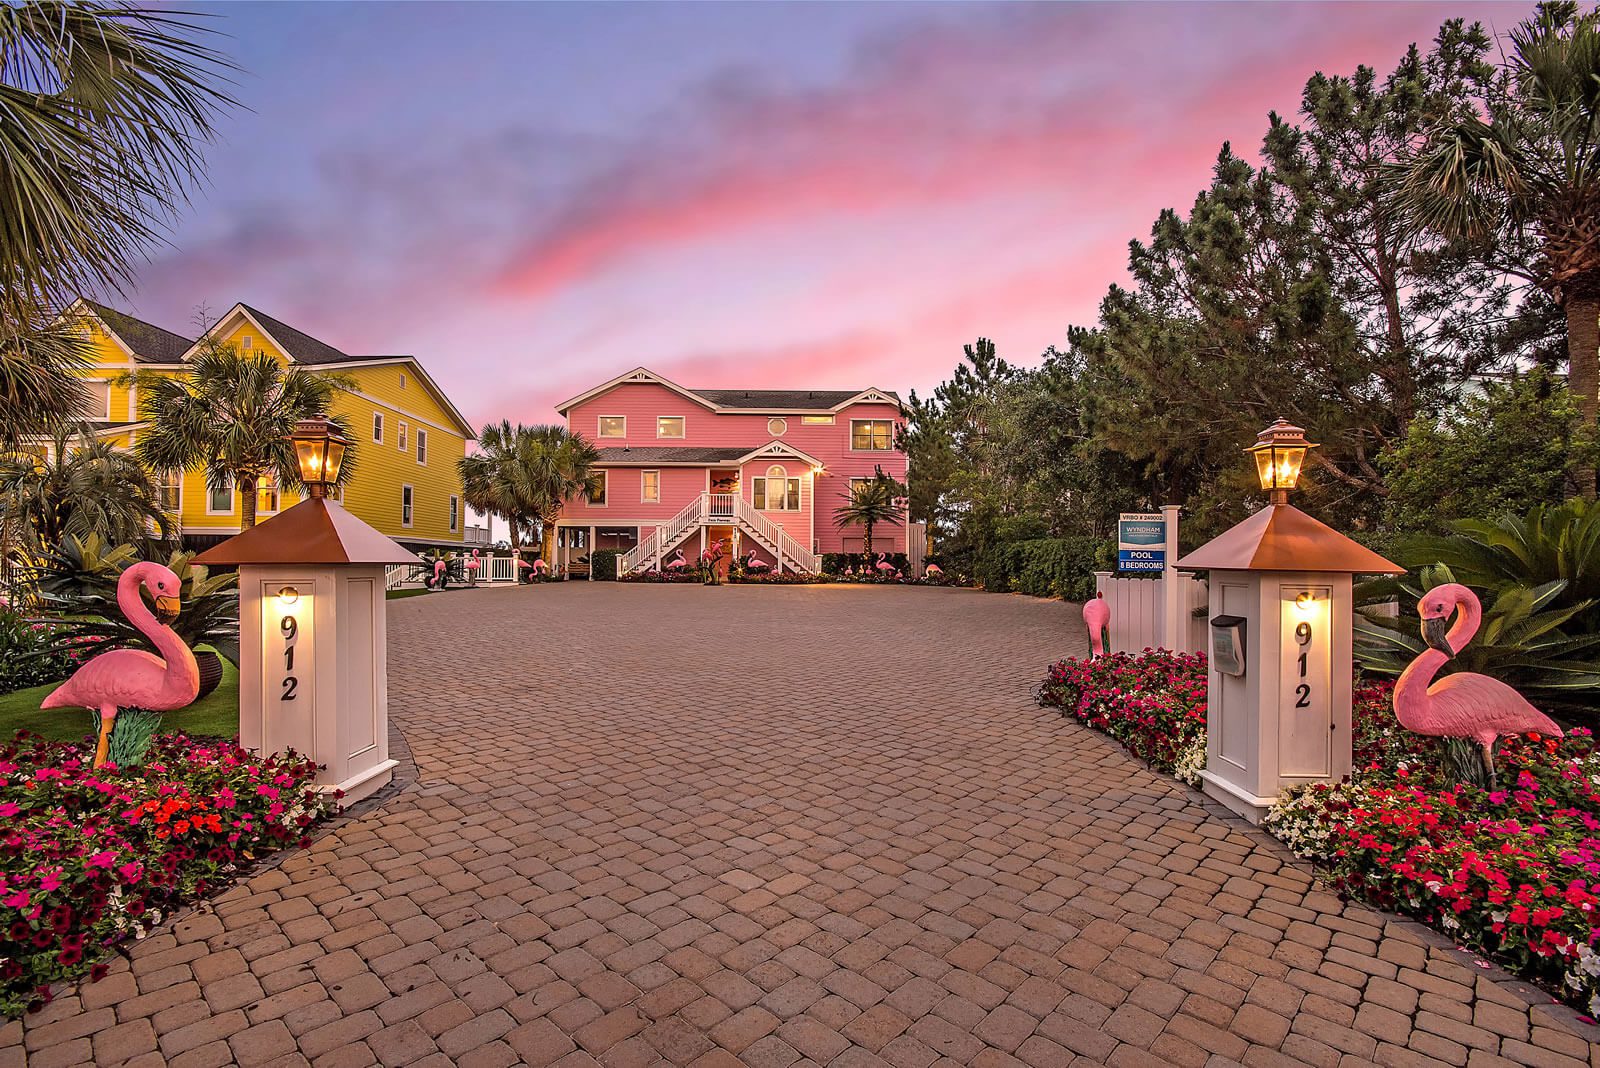 Casa Flamingo Front Entrance After Hours - Isle of Palms, SC